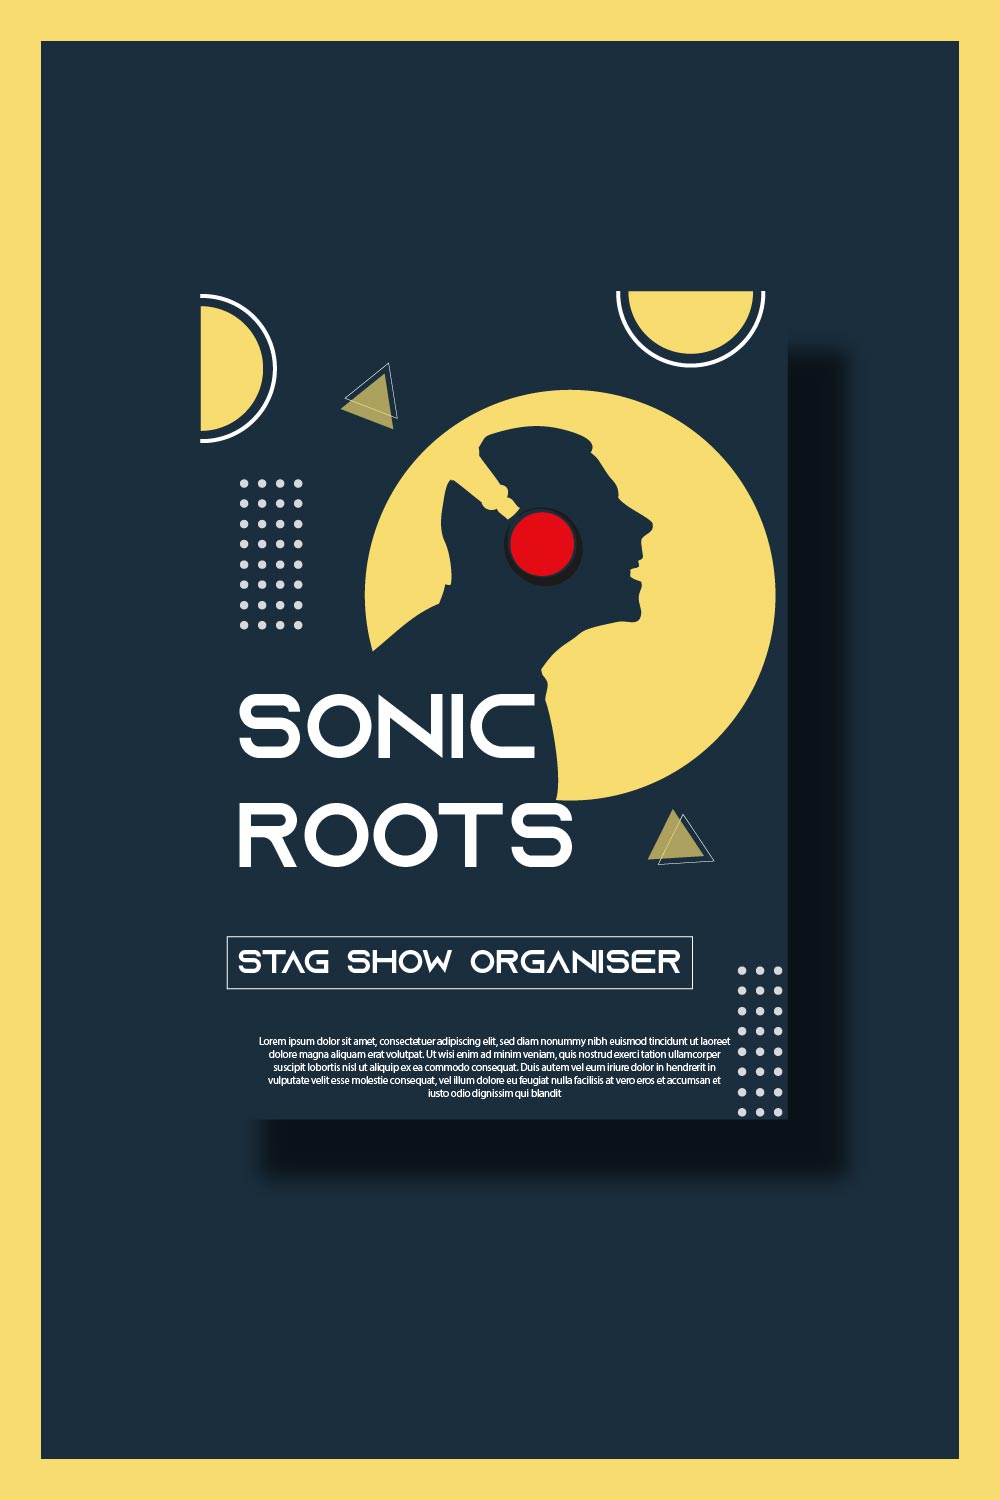 Sonic roots / music poster pinterest preview image.